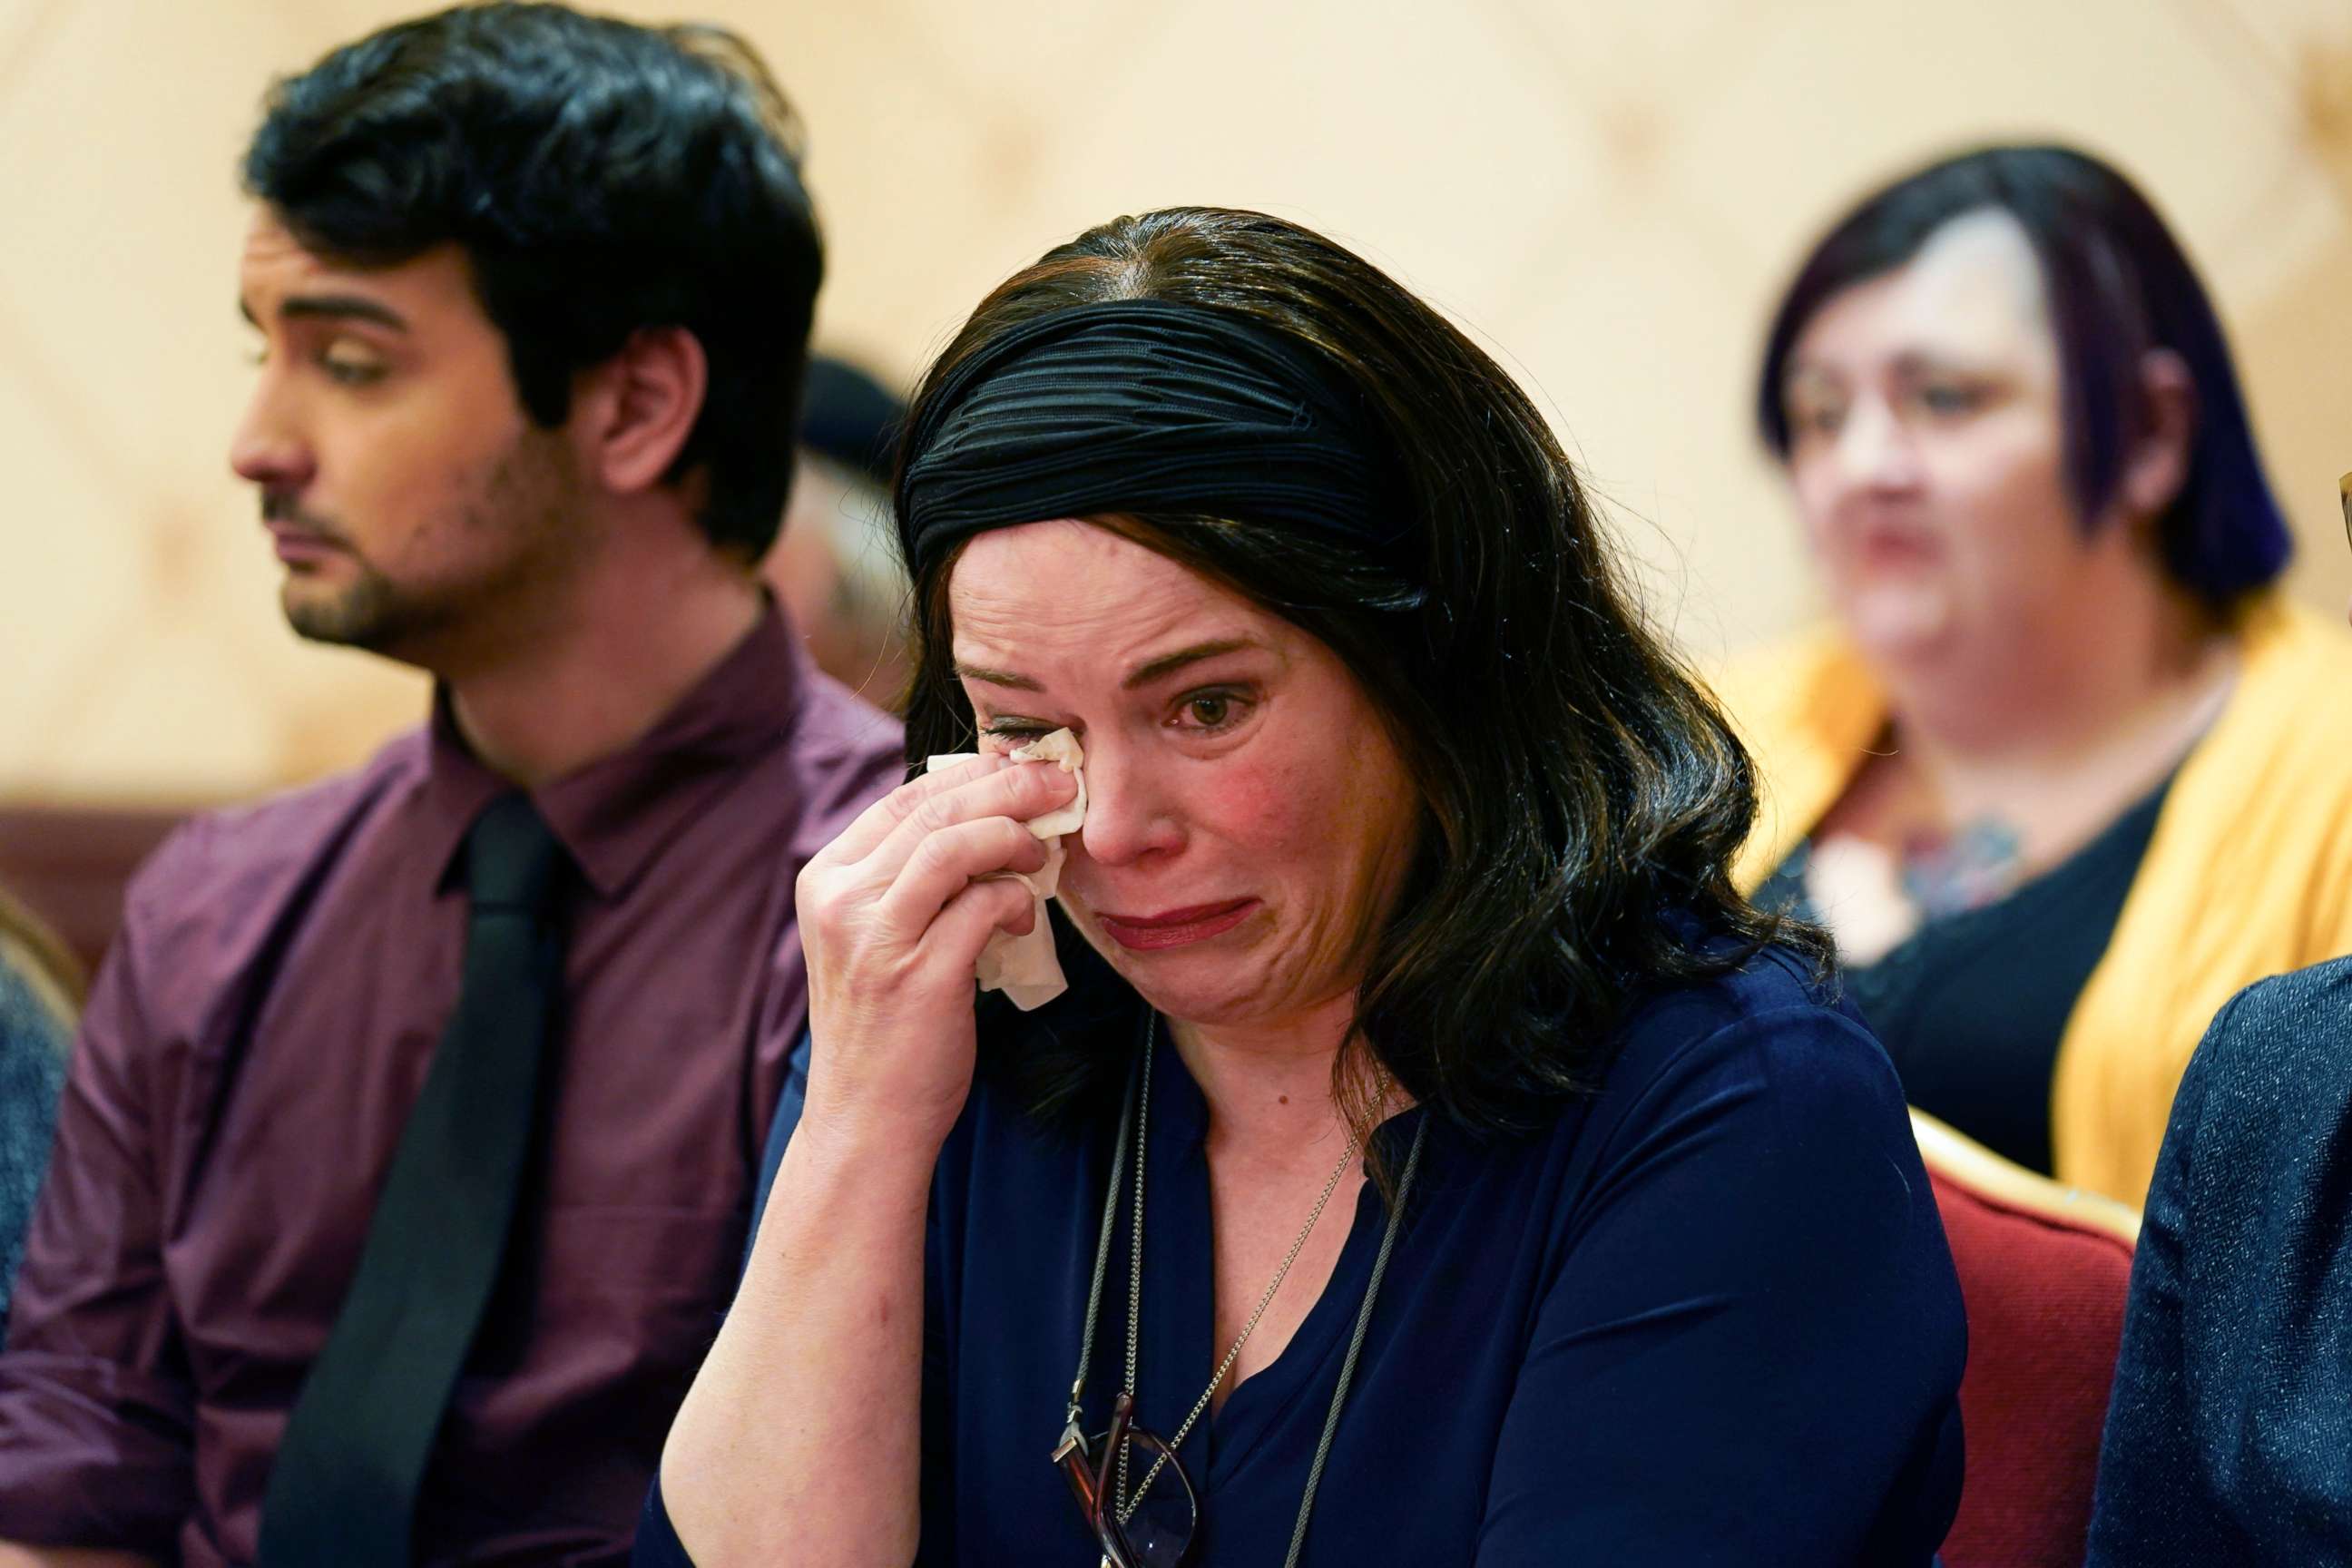 PHOTO: Veronique De La Rosa, mother of Noah Pozner, who was killed in the Sandy Hook Elementary School shooting, wipes away tears during a news conference in Trumbull, Conn., Feb. 15, 2022.